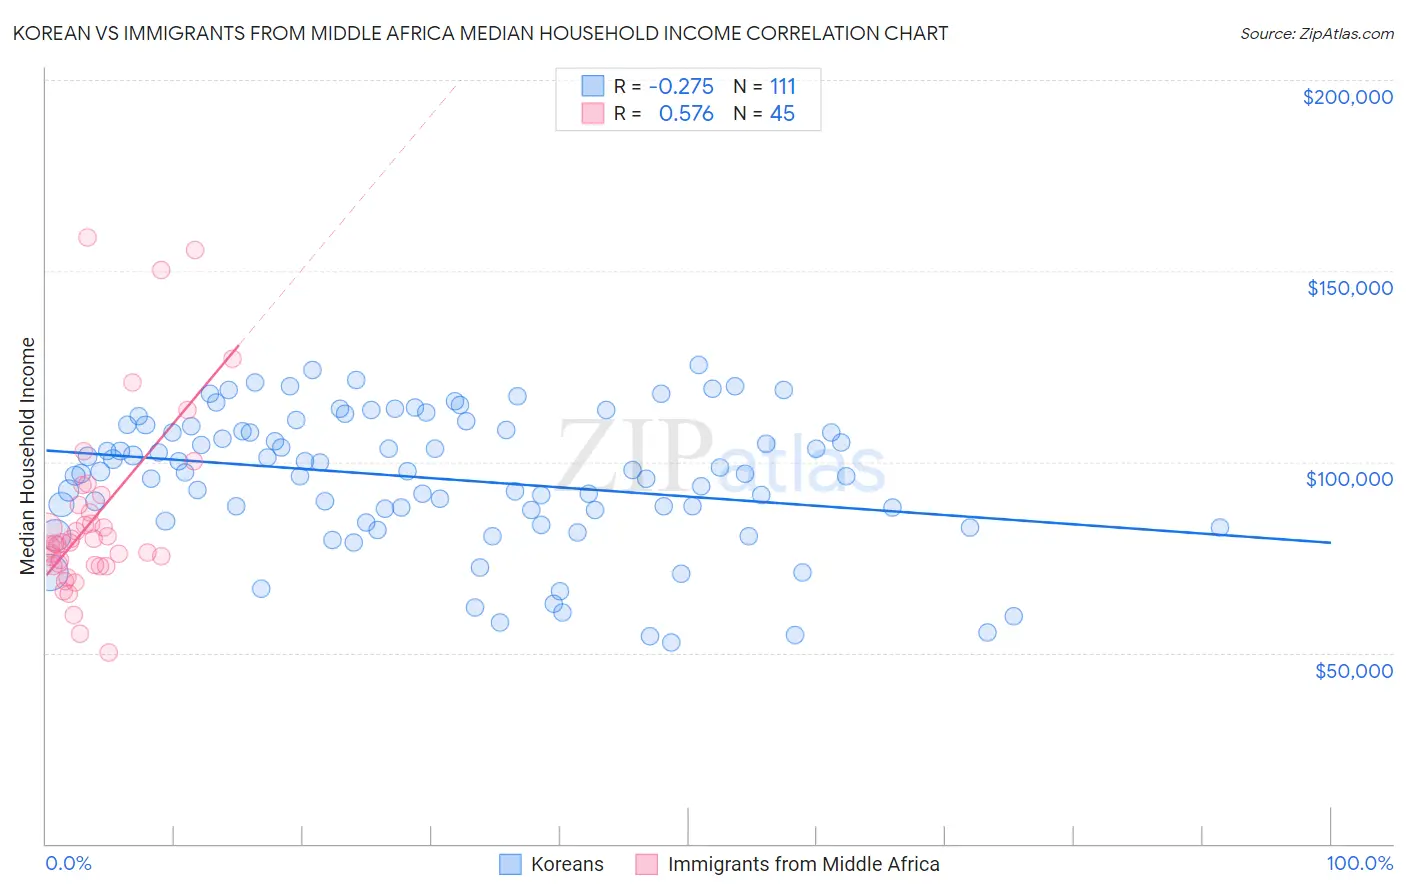 Korean vs Immigrants from Middle Africa Median Household Income